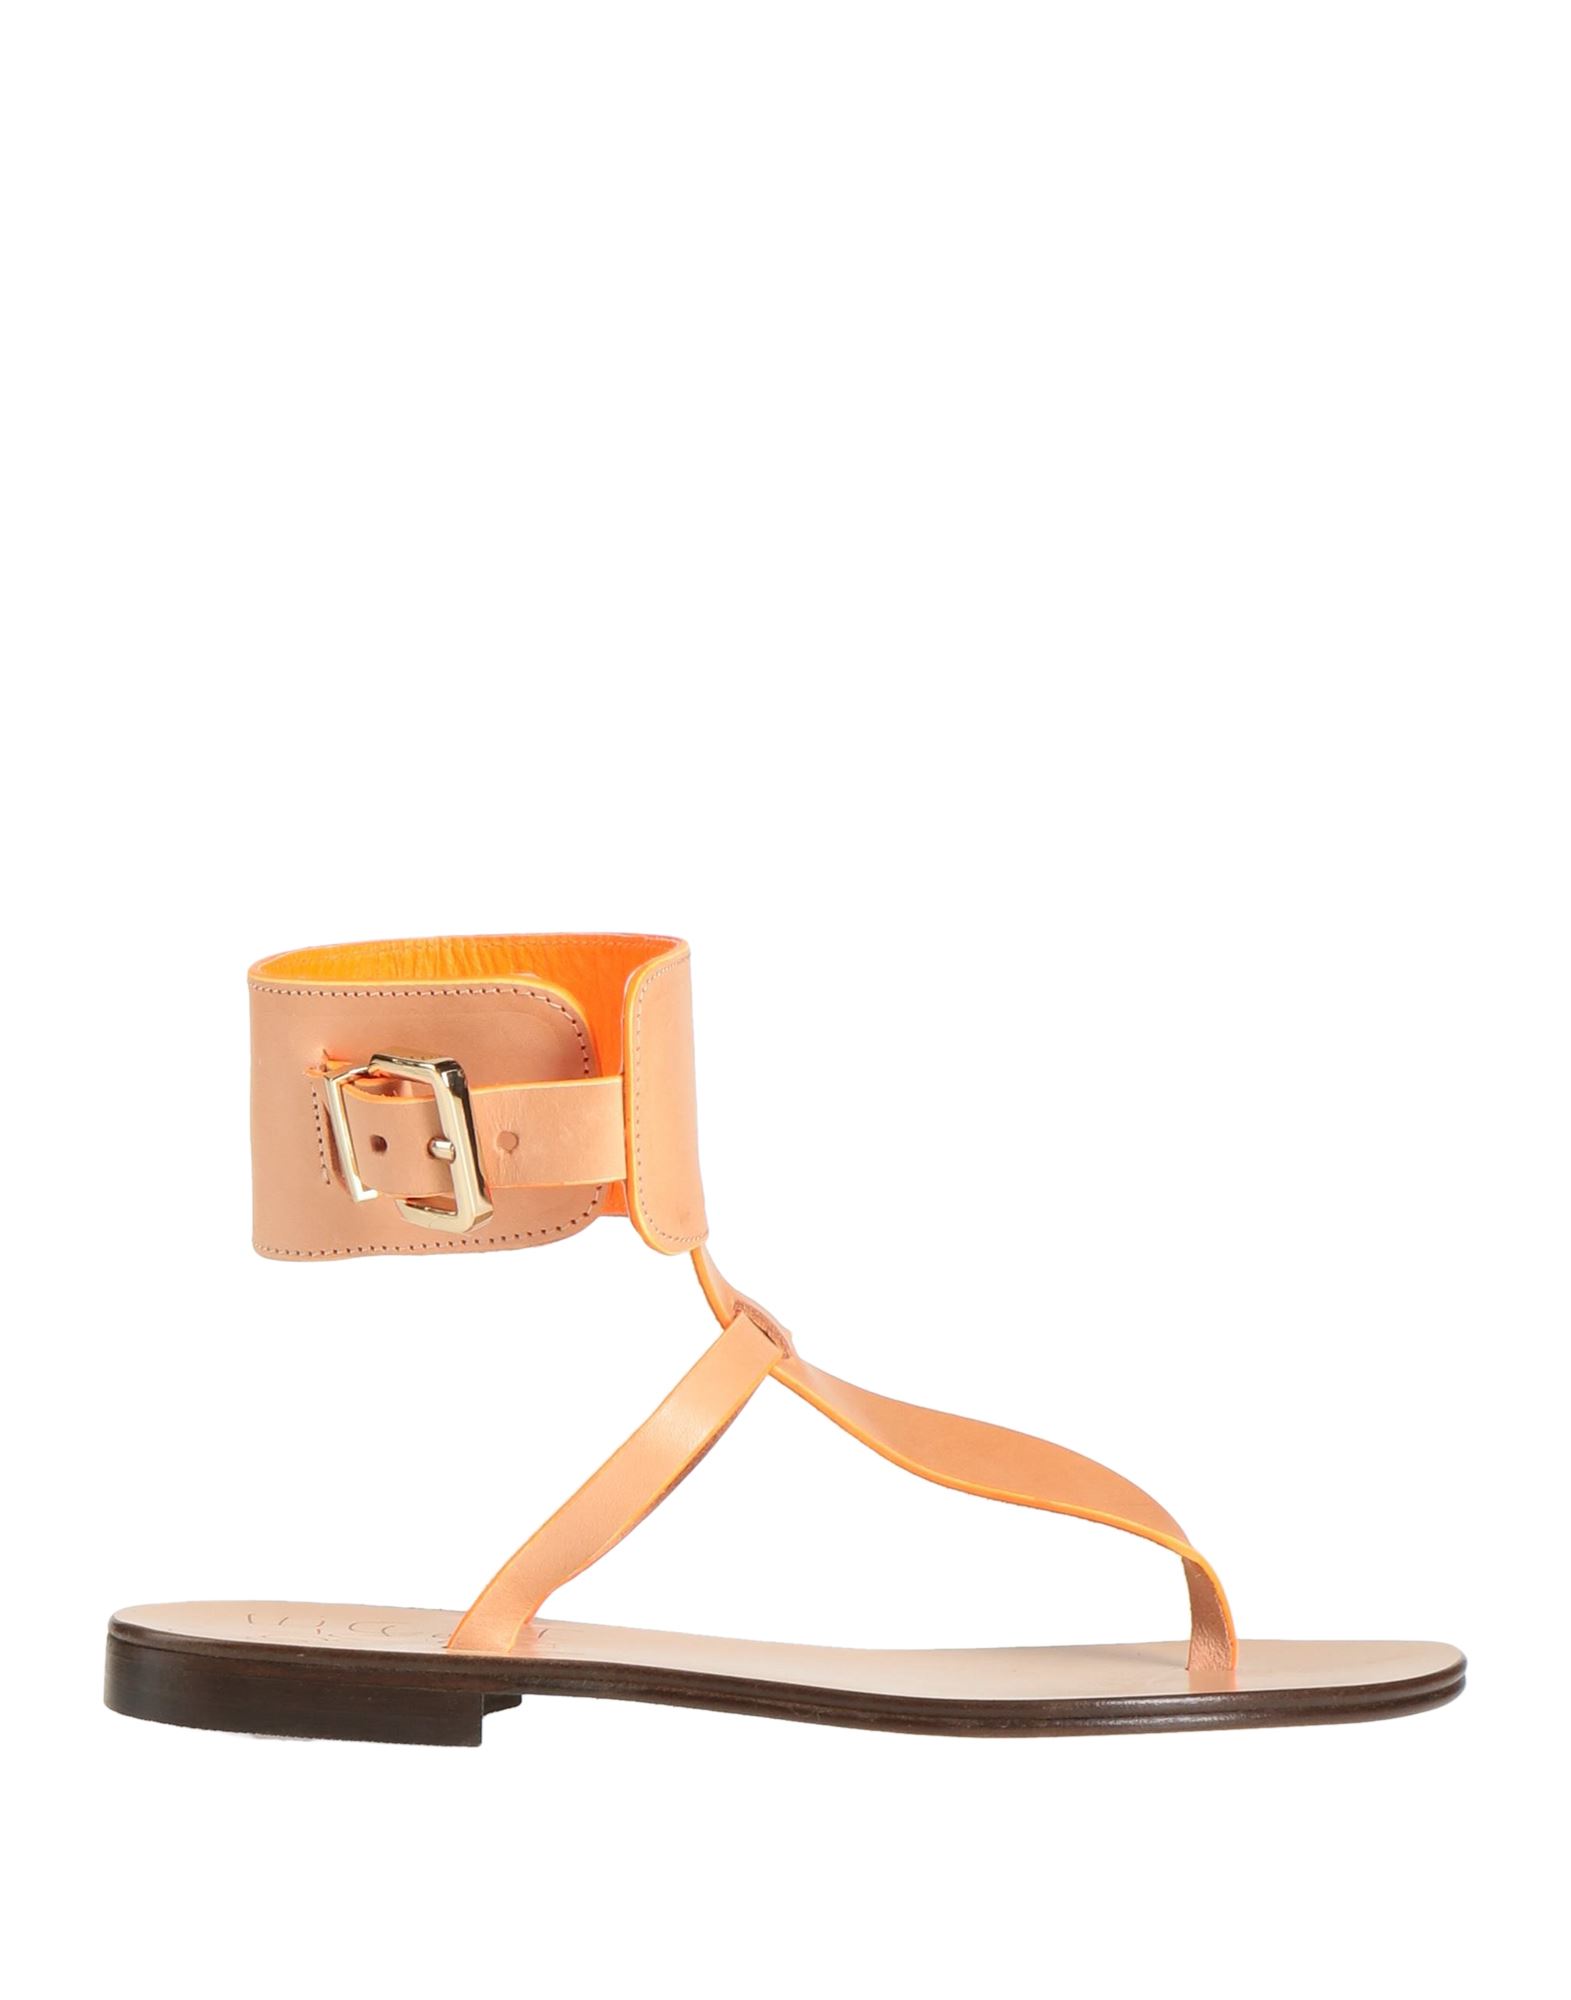 Solemaria Toe Strap Sandals In Light Brown